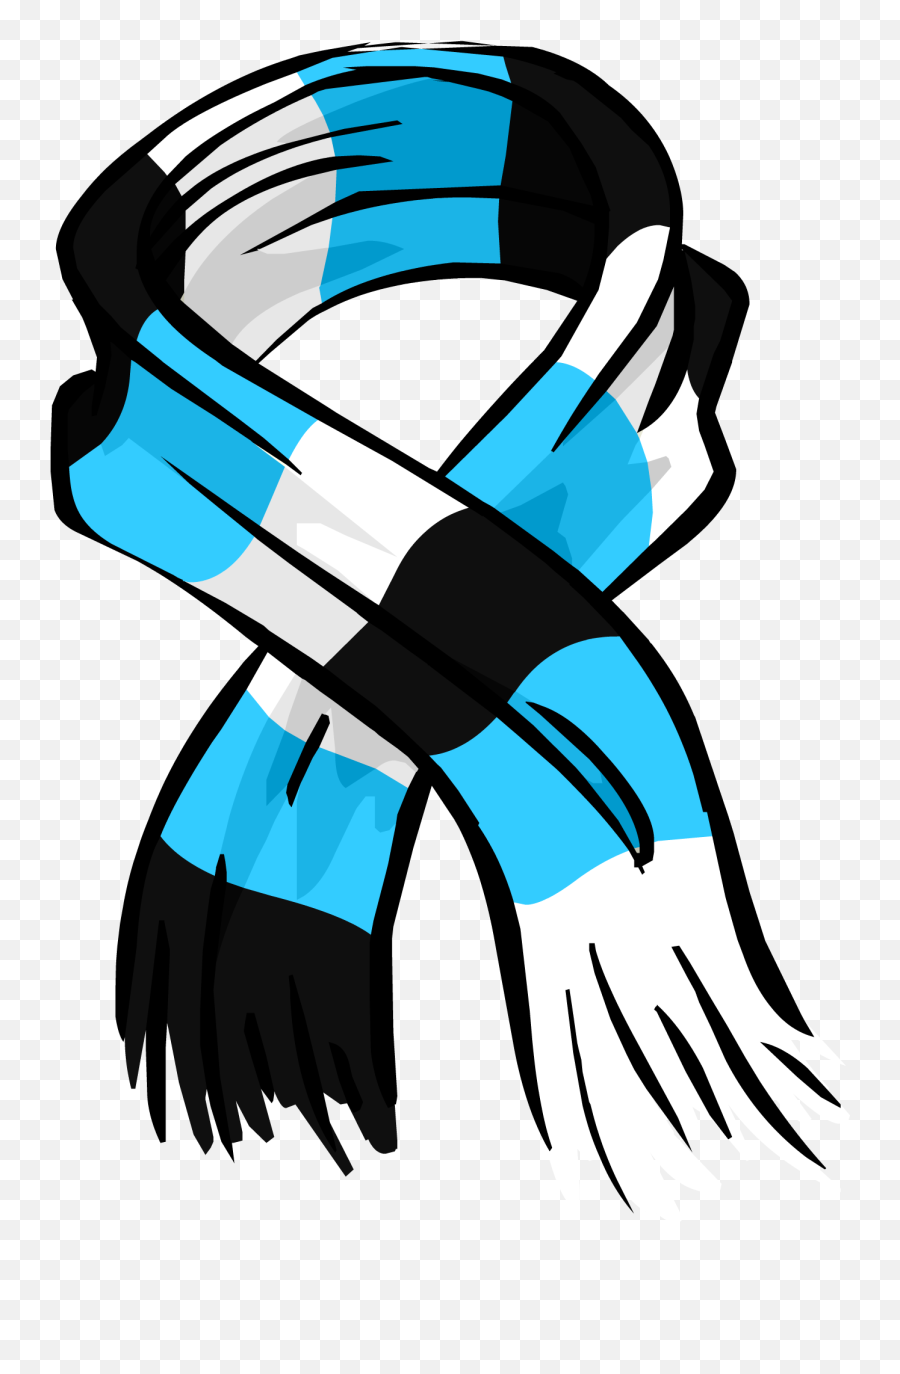 Download Blue Striped Scarf Png Image For Free - Scarf Clipart,Scarf Transparent Background